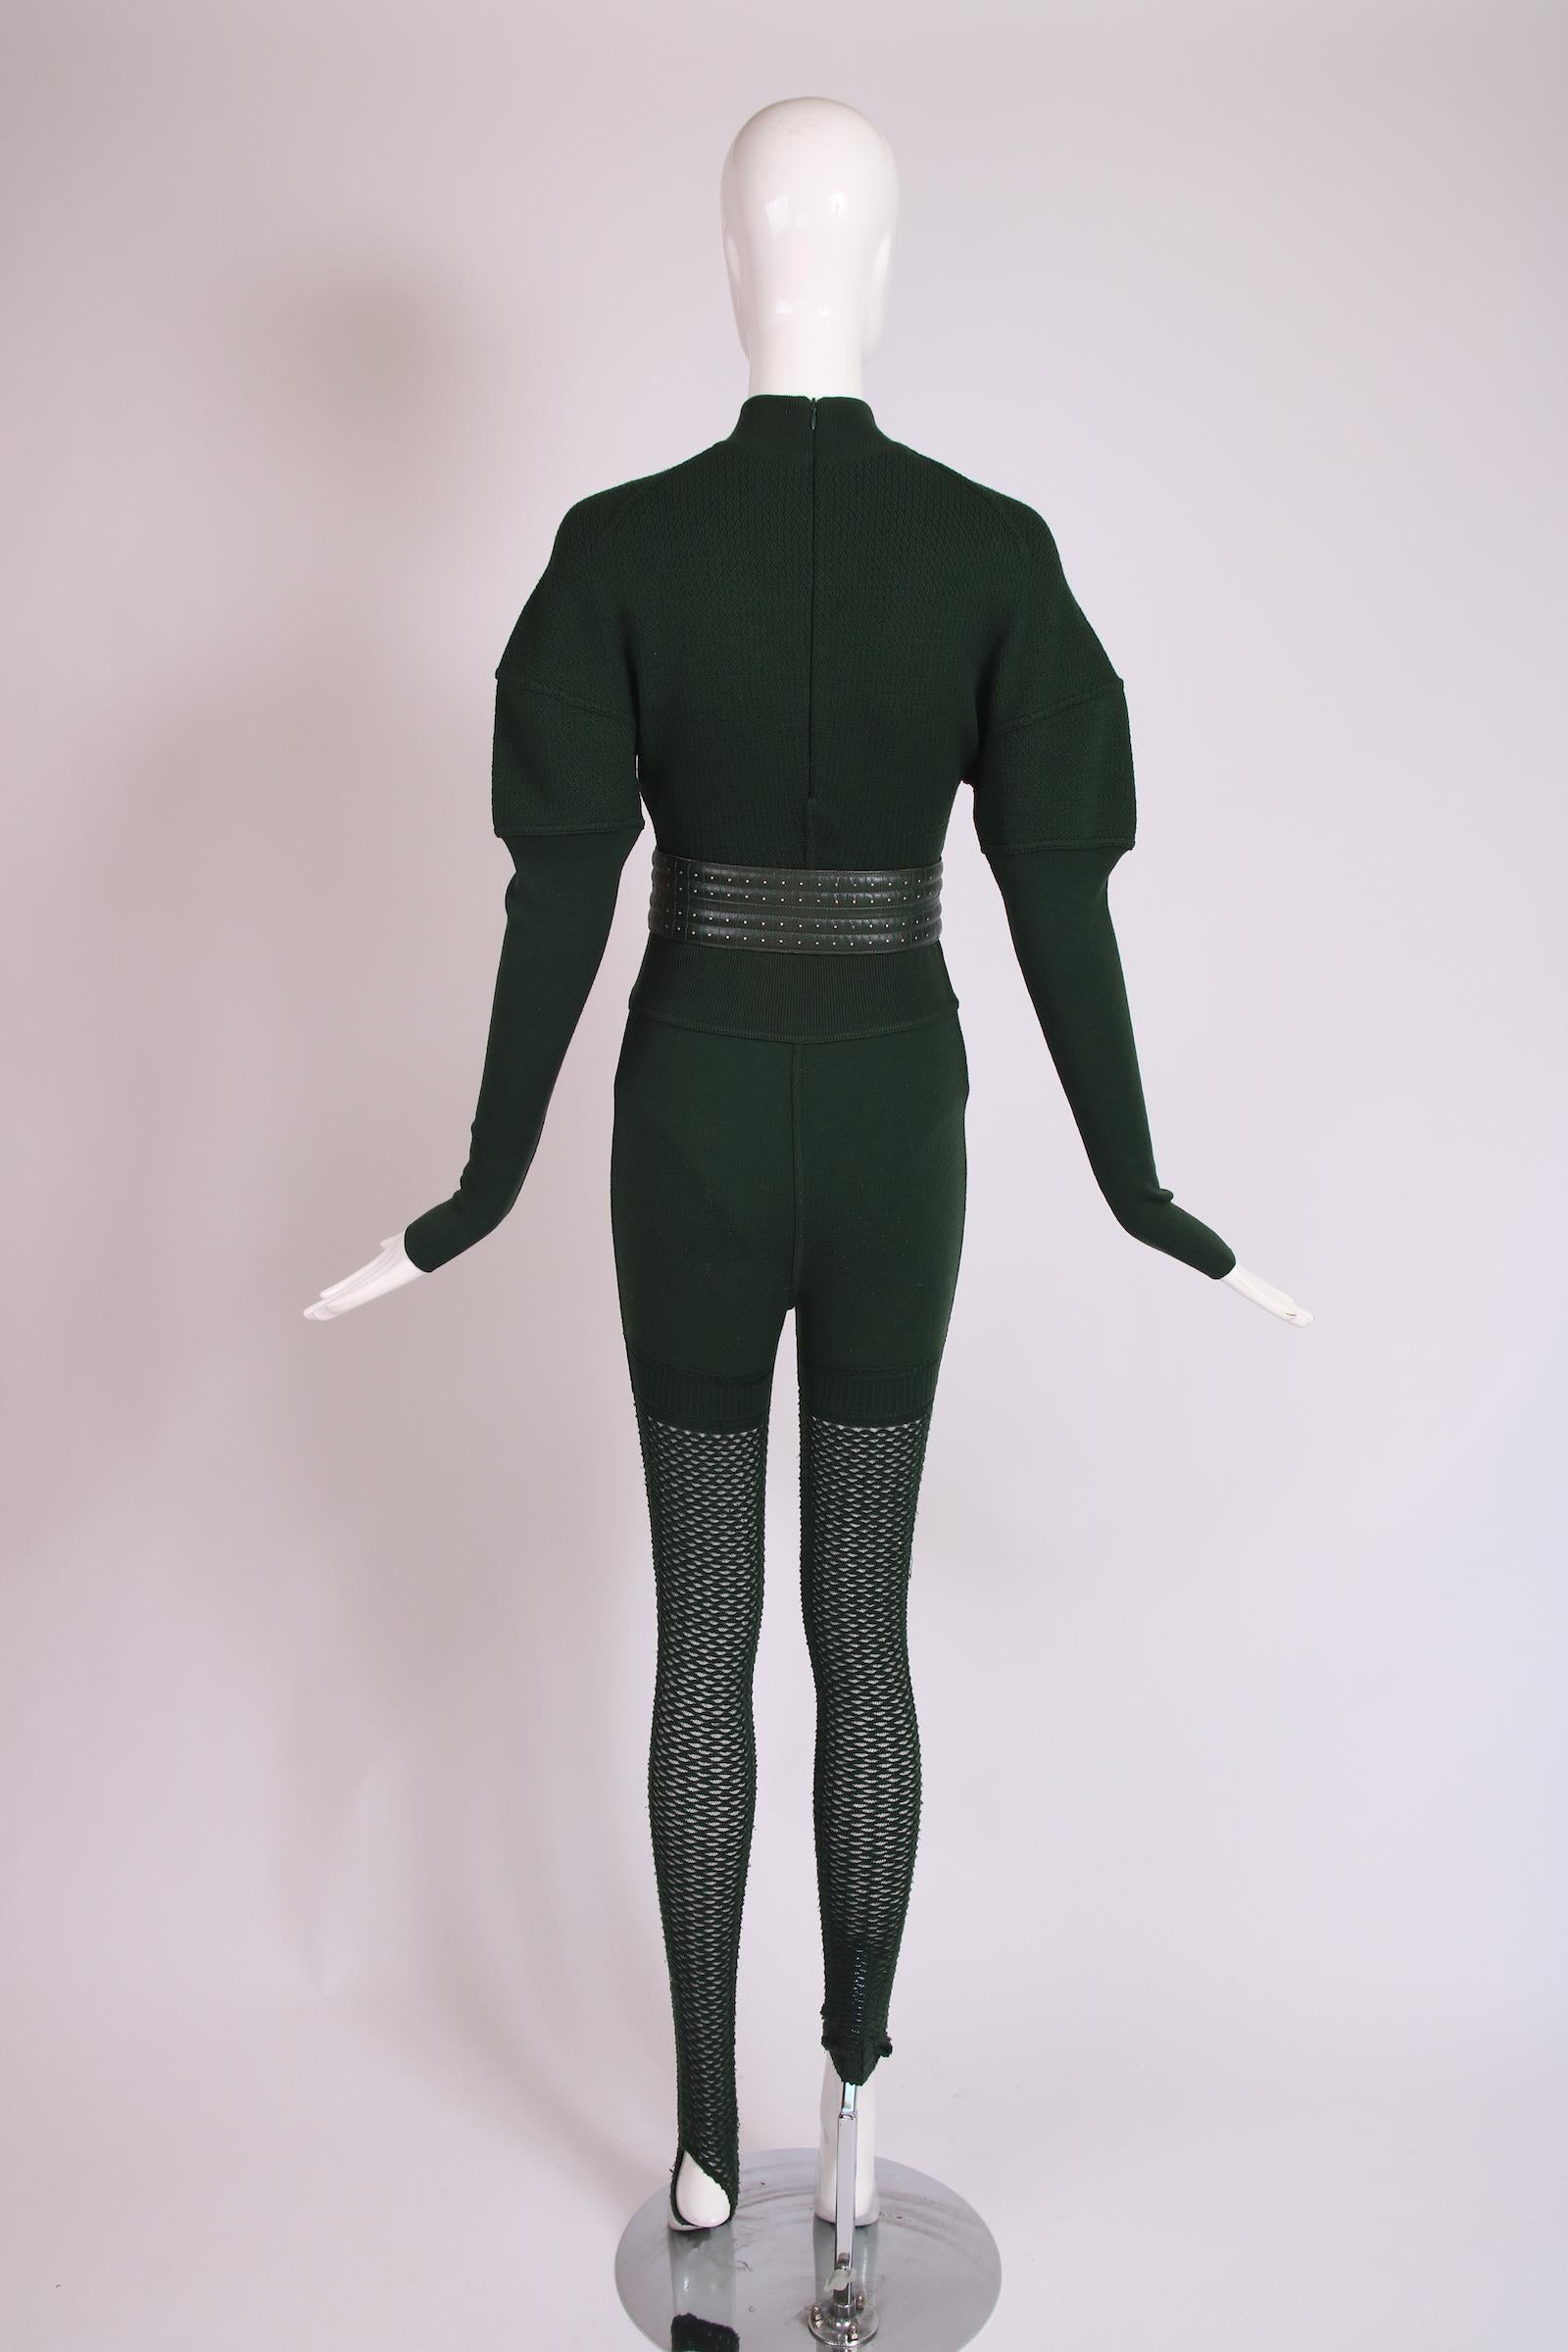 Black Alaia Green Knit Body Suit, Stirrup Leggings & Matching Leather Belt For Sale